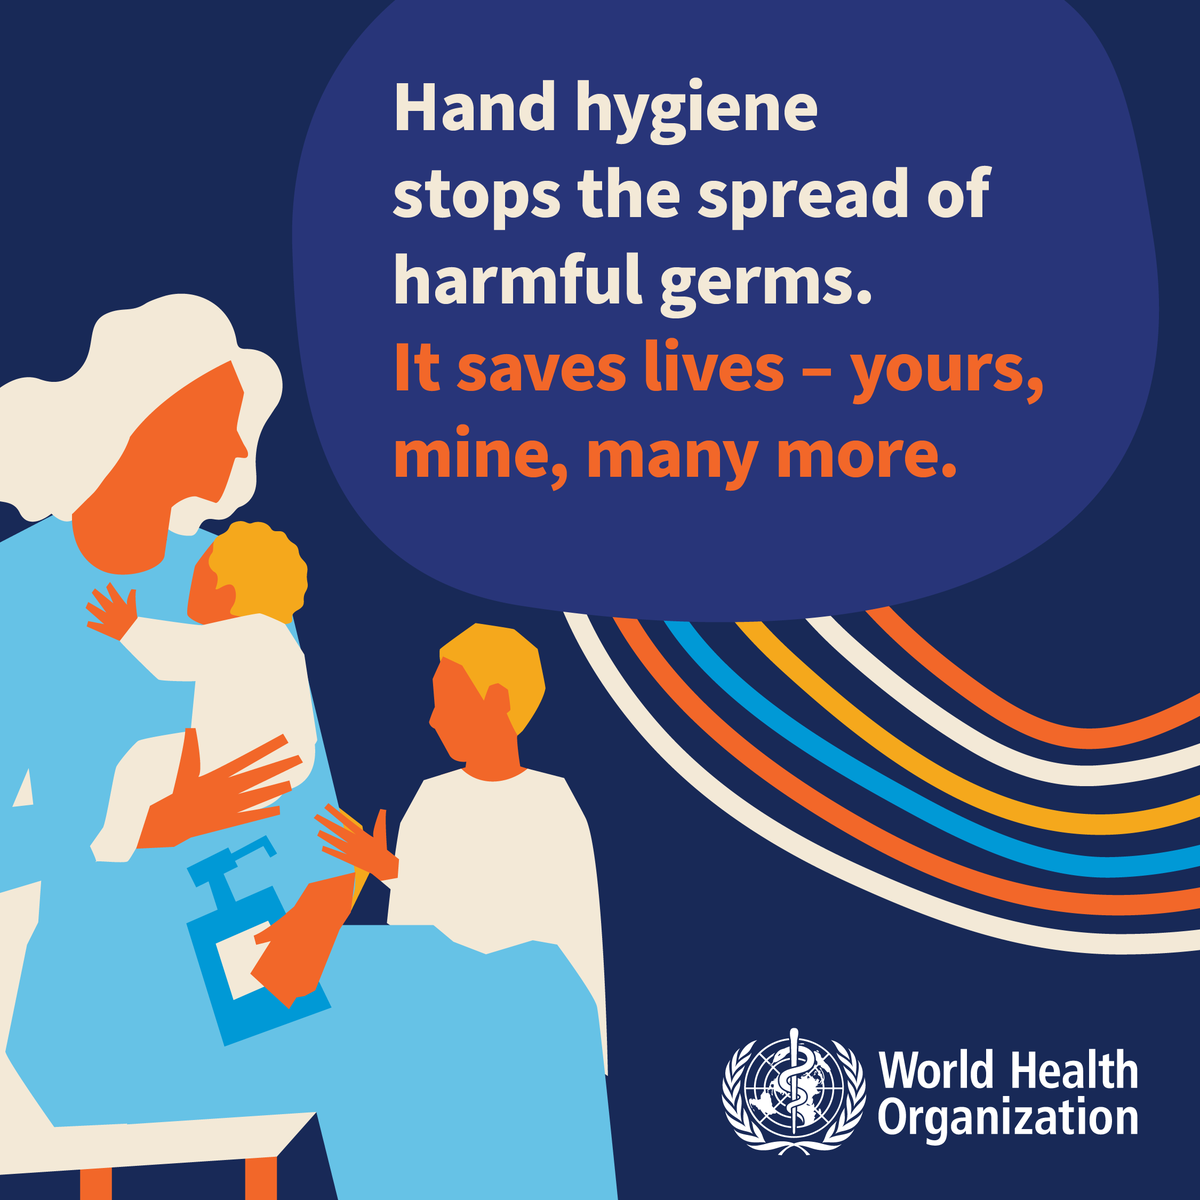 Today is also #WorldHandHygieneDay 🧼 Hand hygiene stops the spread of harmful germs. It saves lives. @WHO #HandHygiene #WHHD